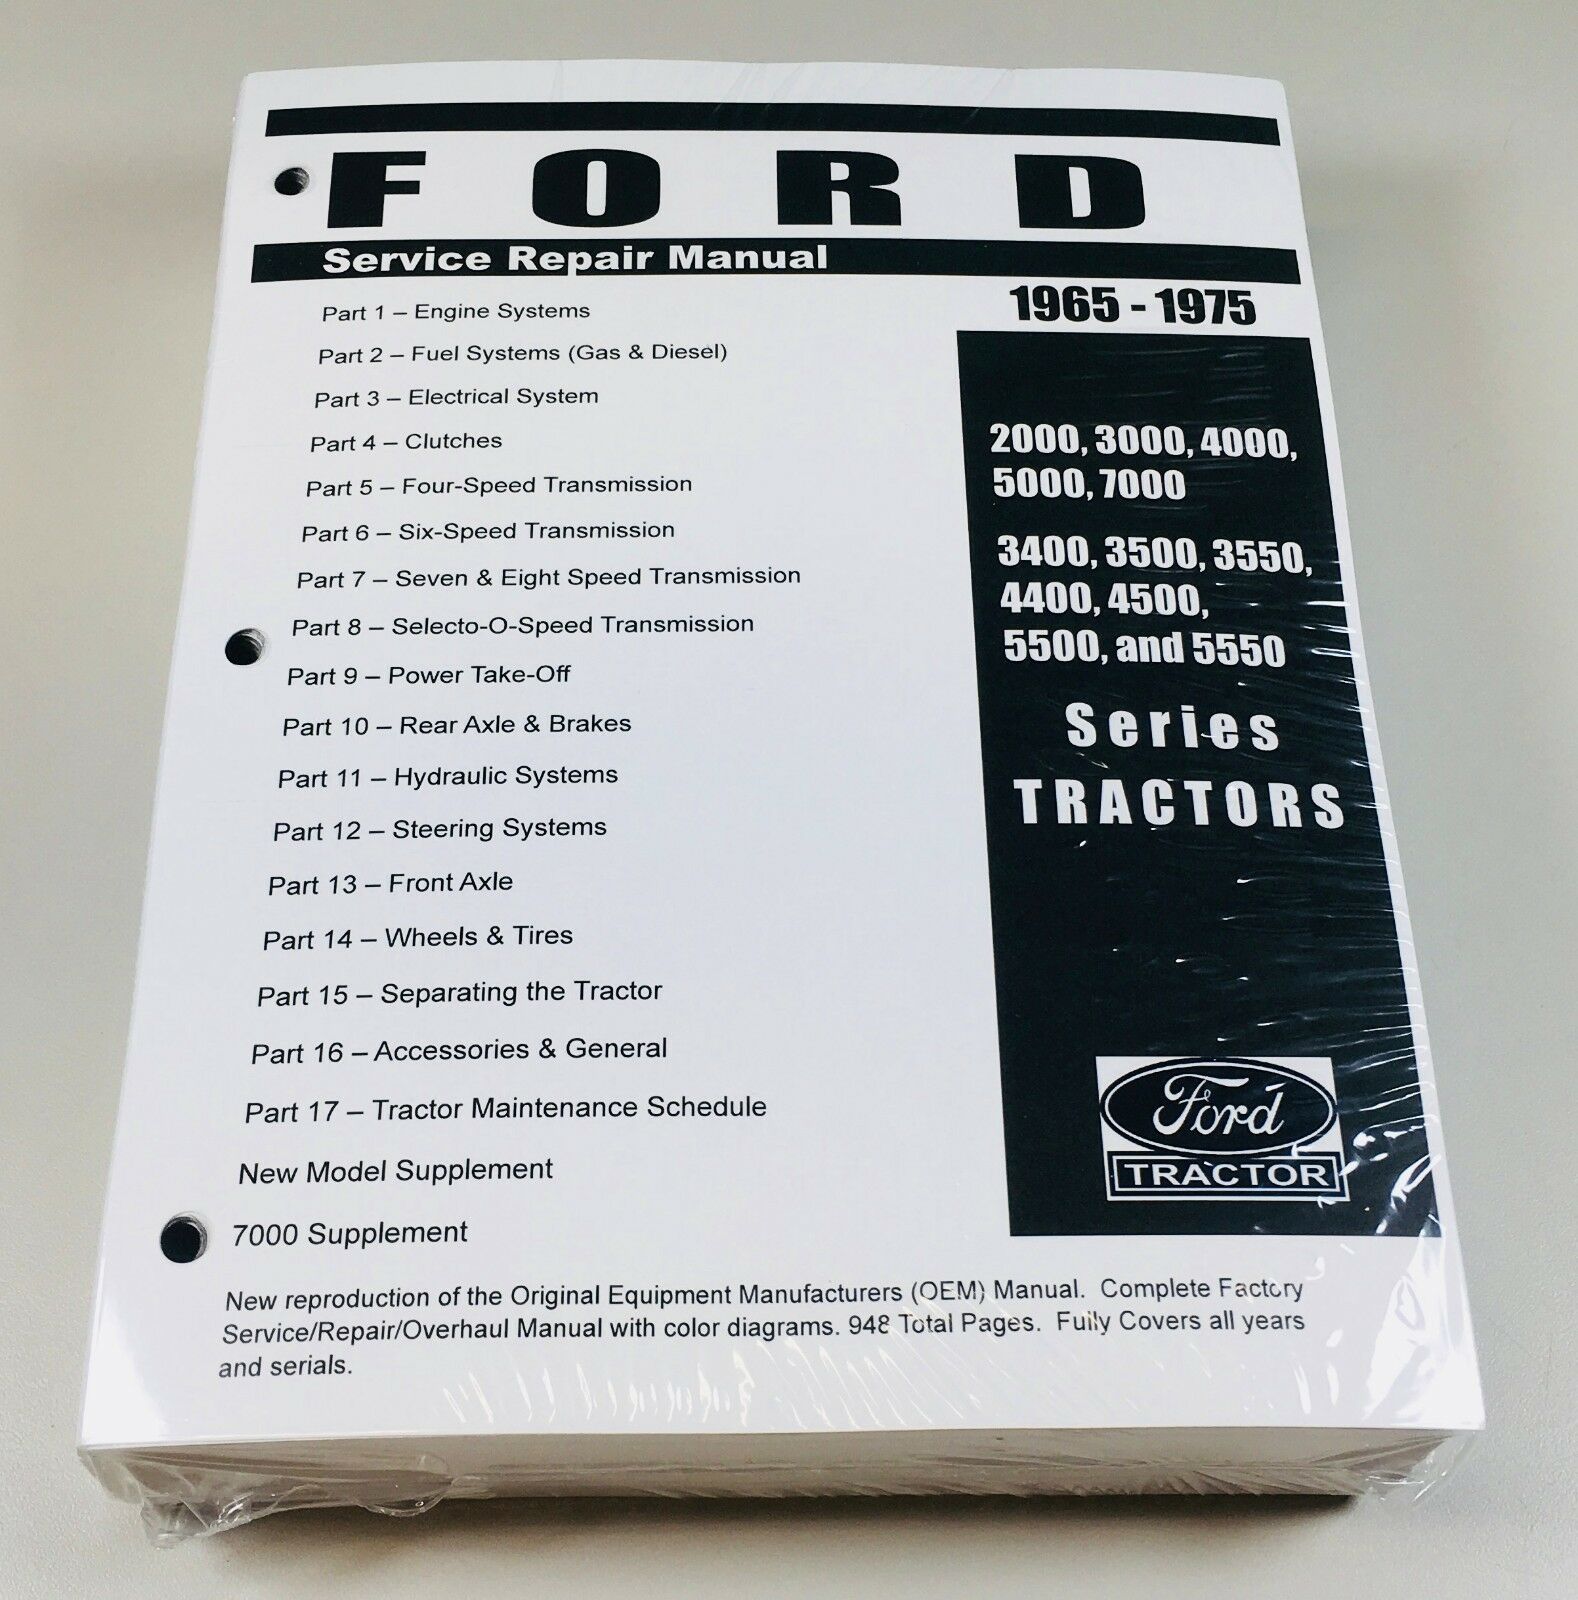 Ford 2000 3000 4000 5000 7000 (3400-5550) Tractor Service Shop Manual 1965-1975